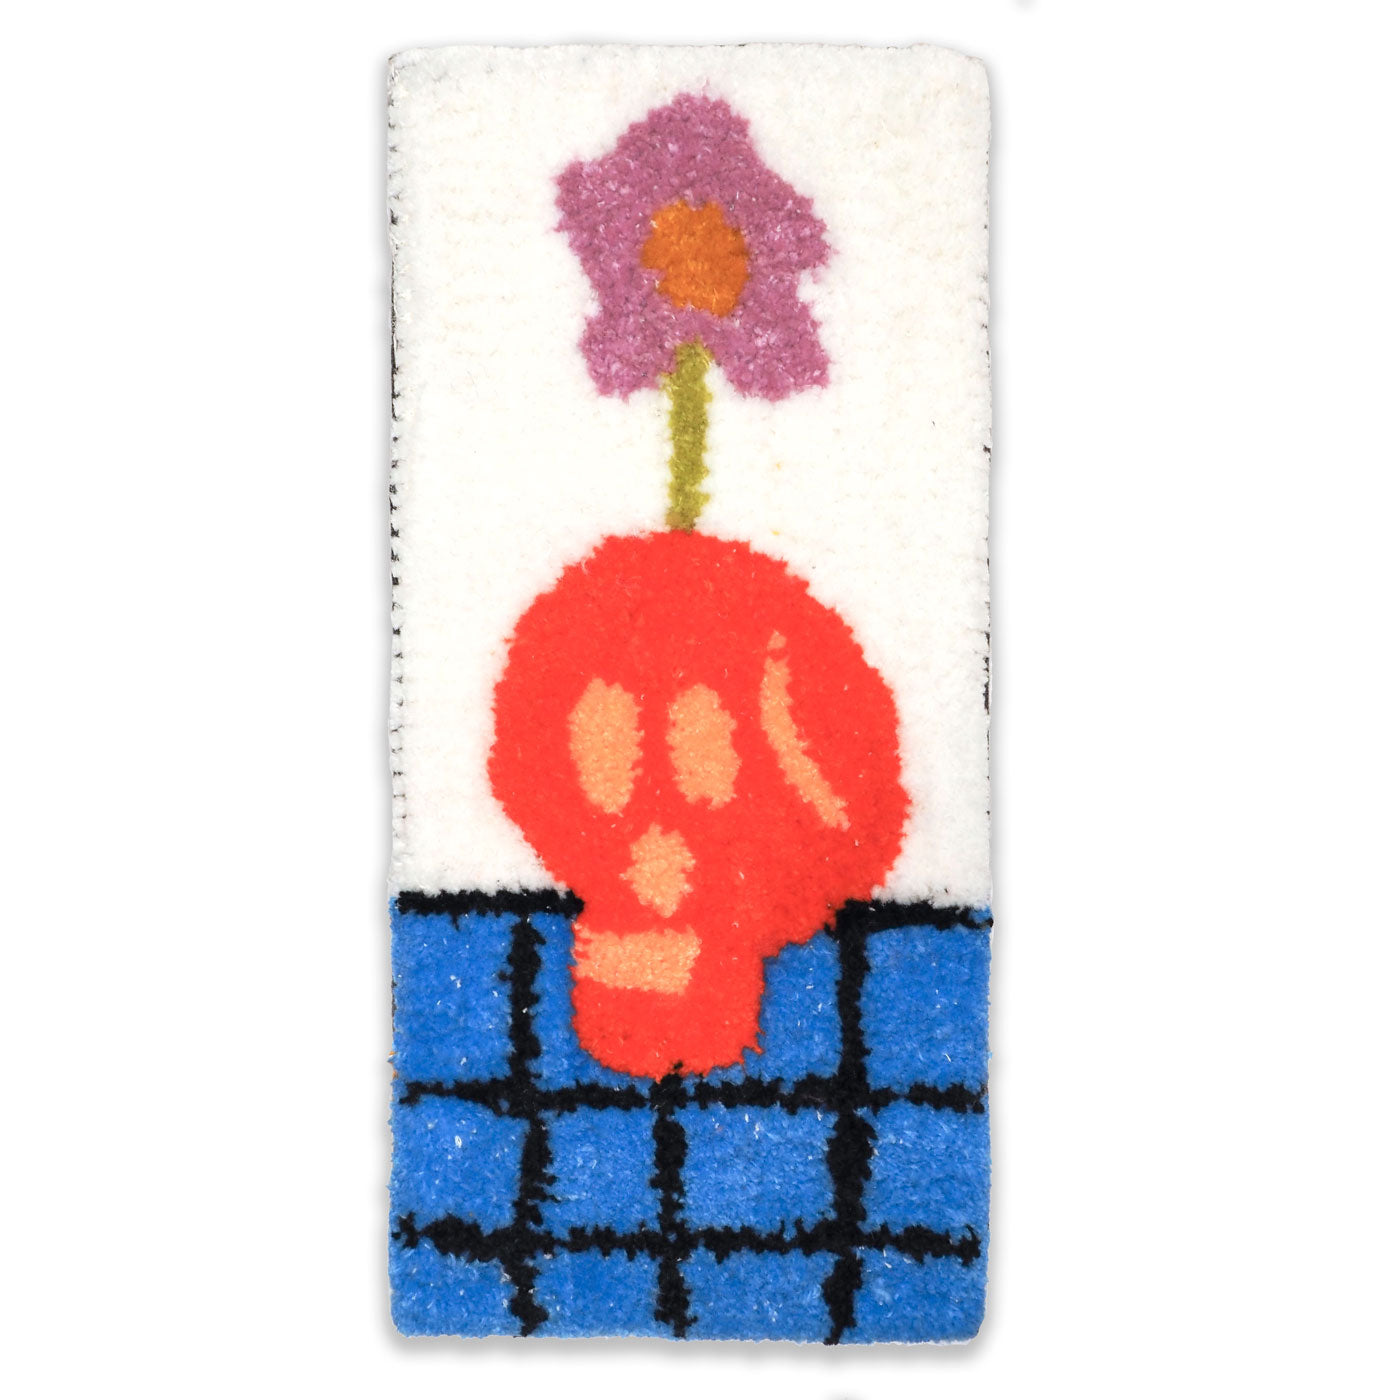 Hand-tufted wall hanging featuring a red skull on a blue checked surface with a purple flower coming out of the top of its head